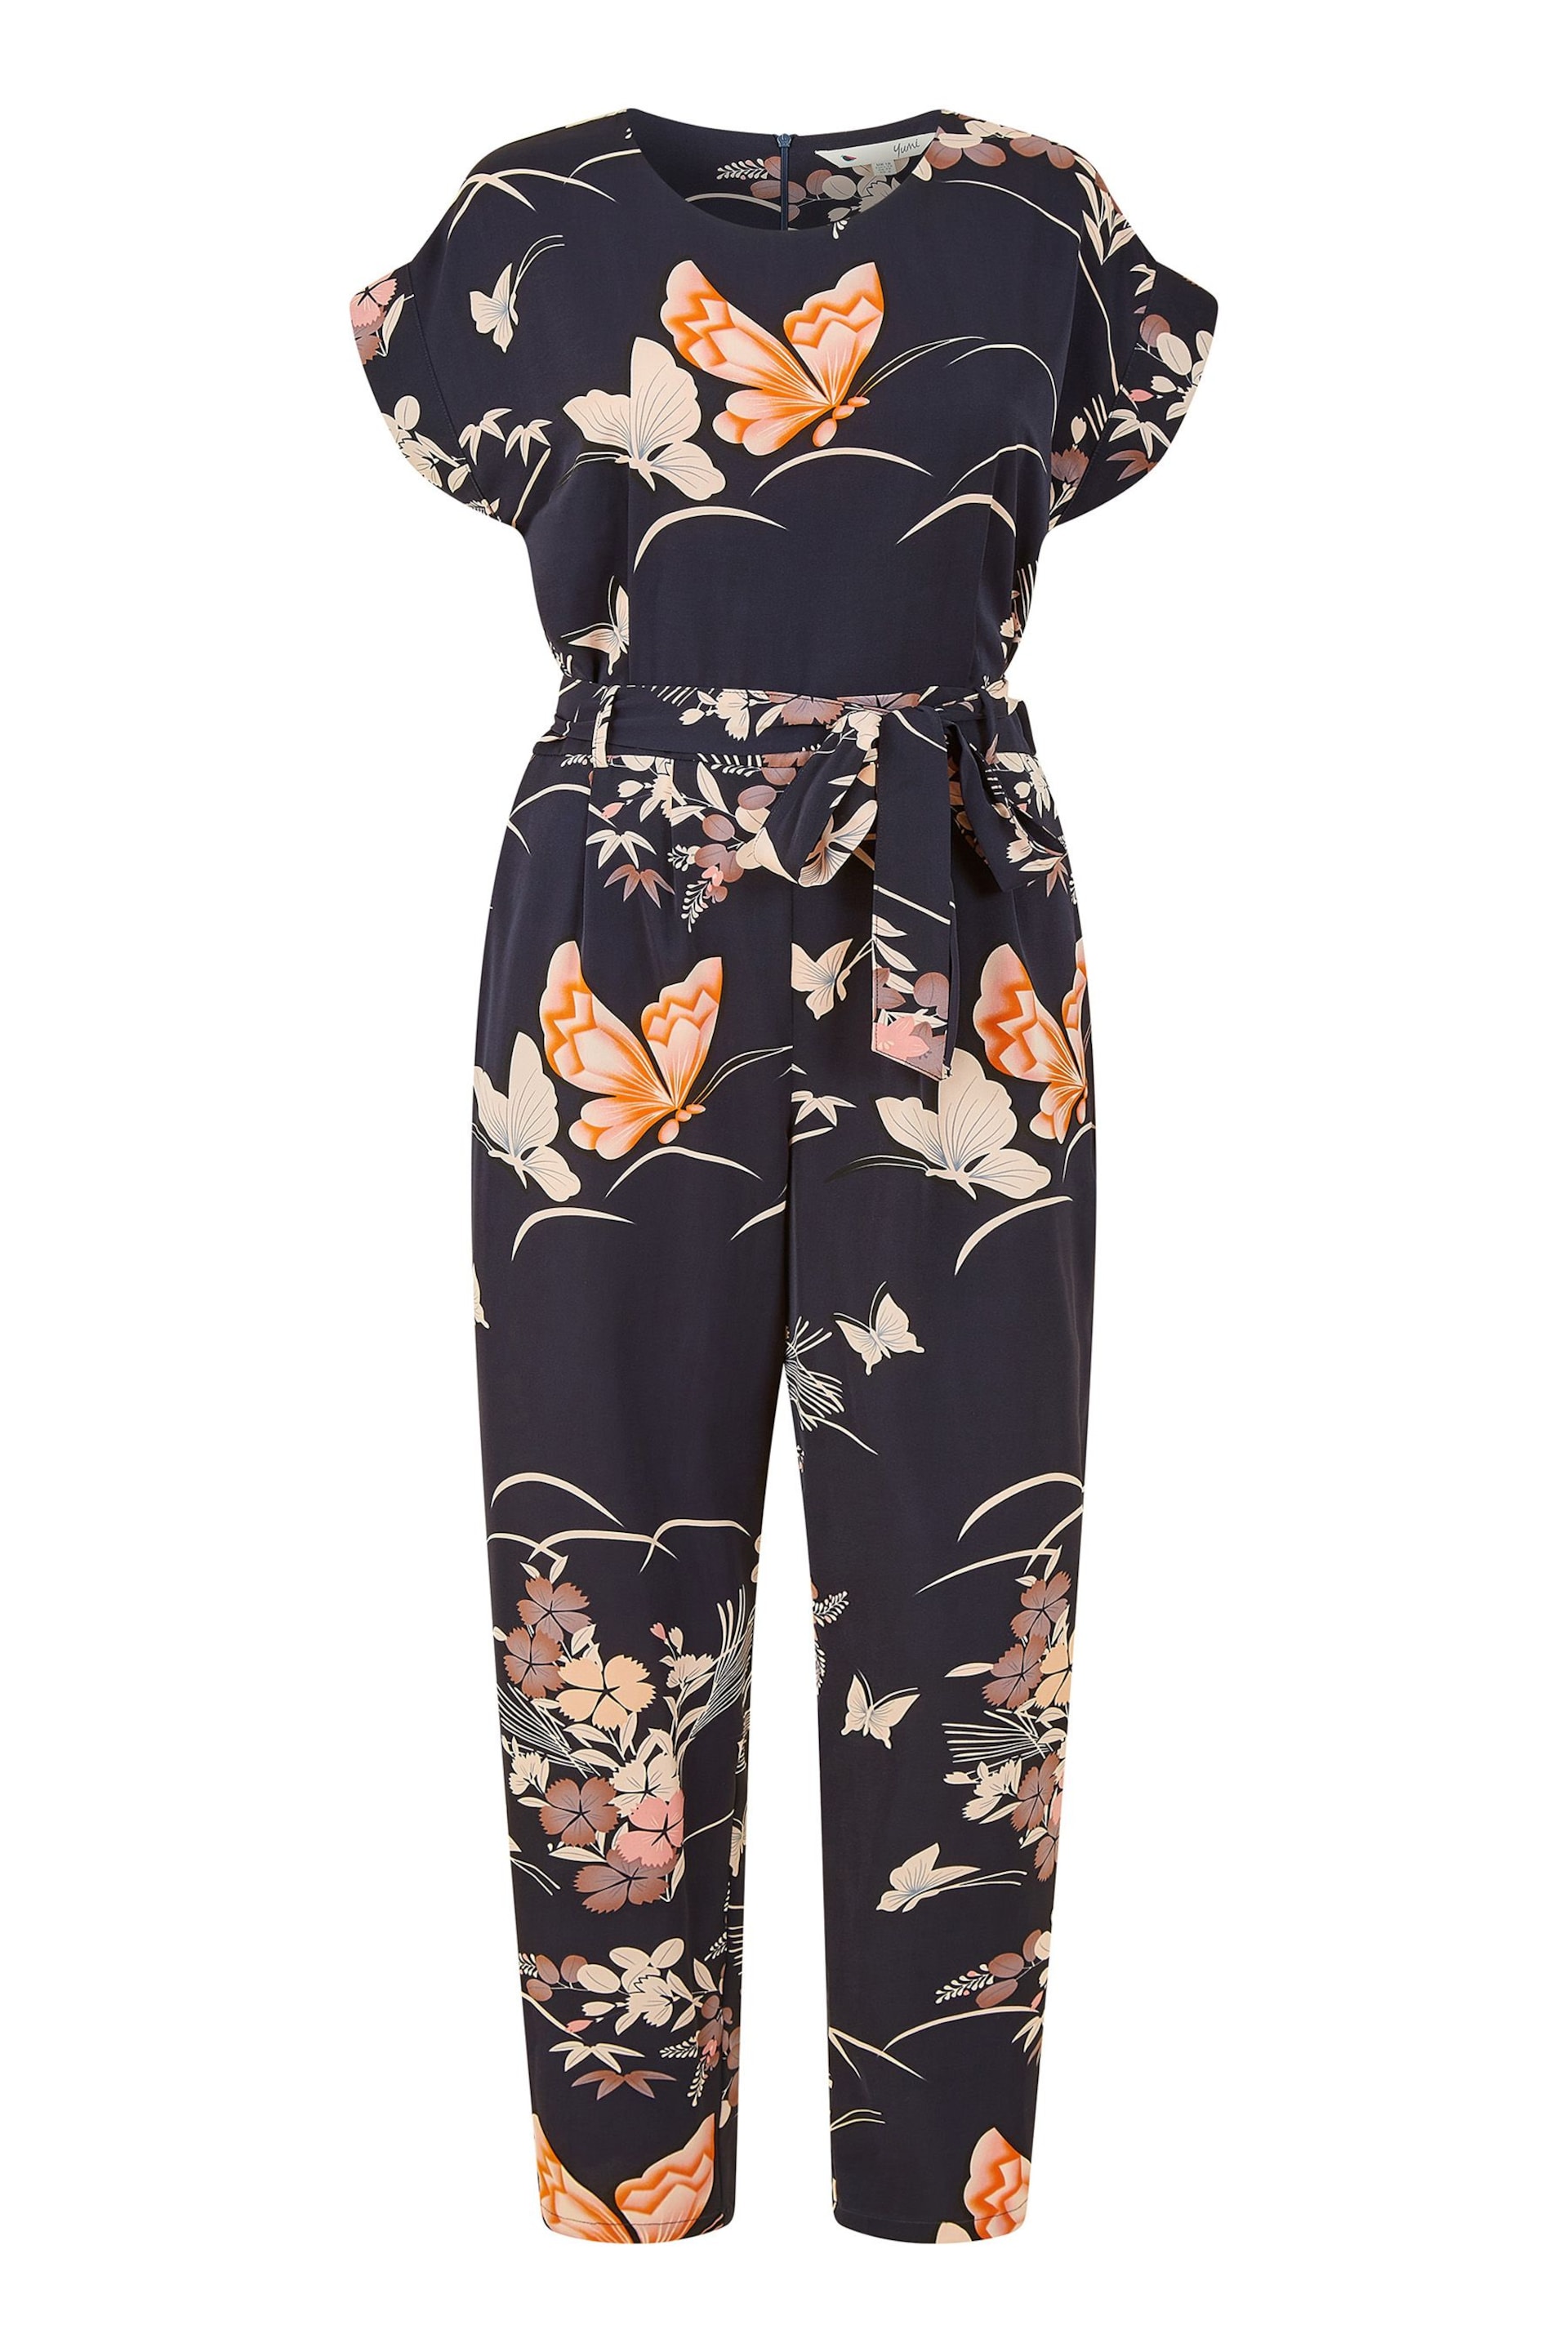 Yumi Blue Butterfly Print Jumpsuit - Image 5 of 5